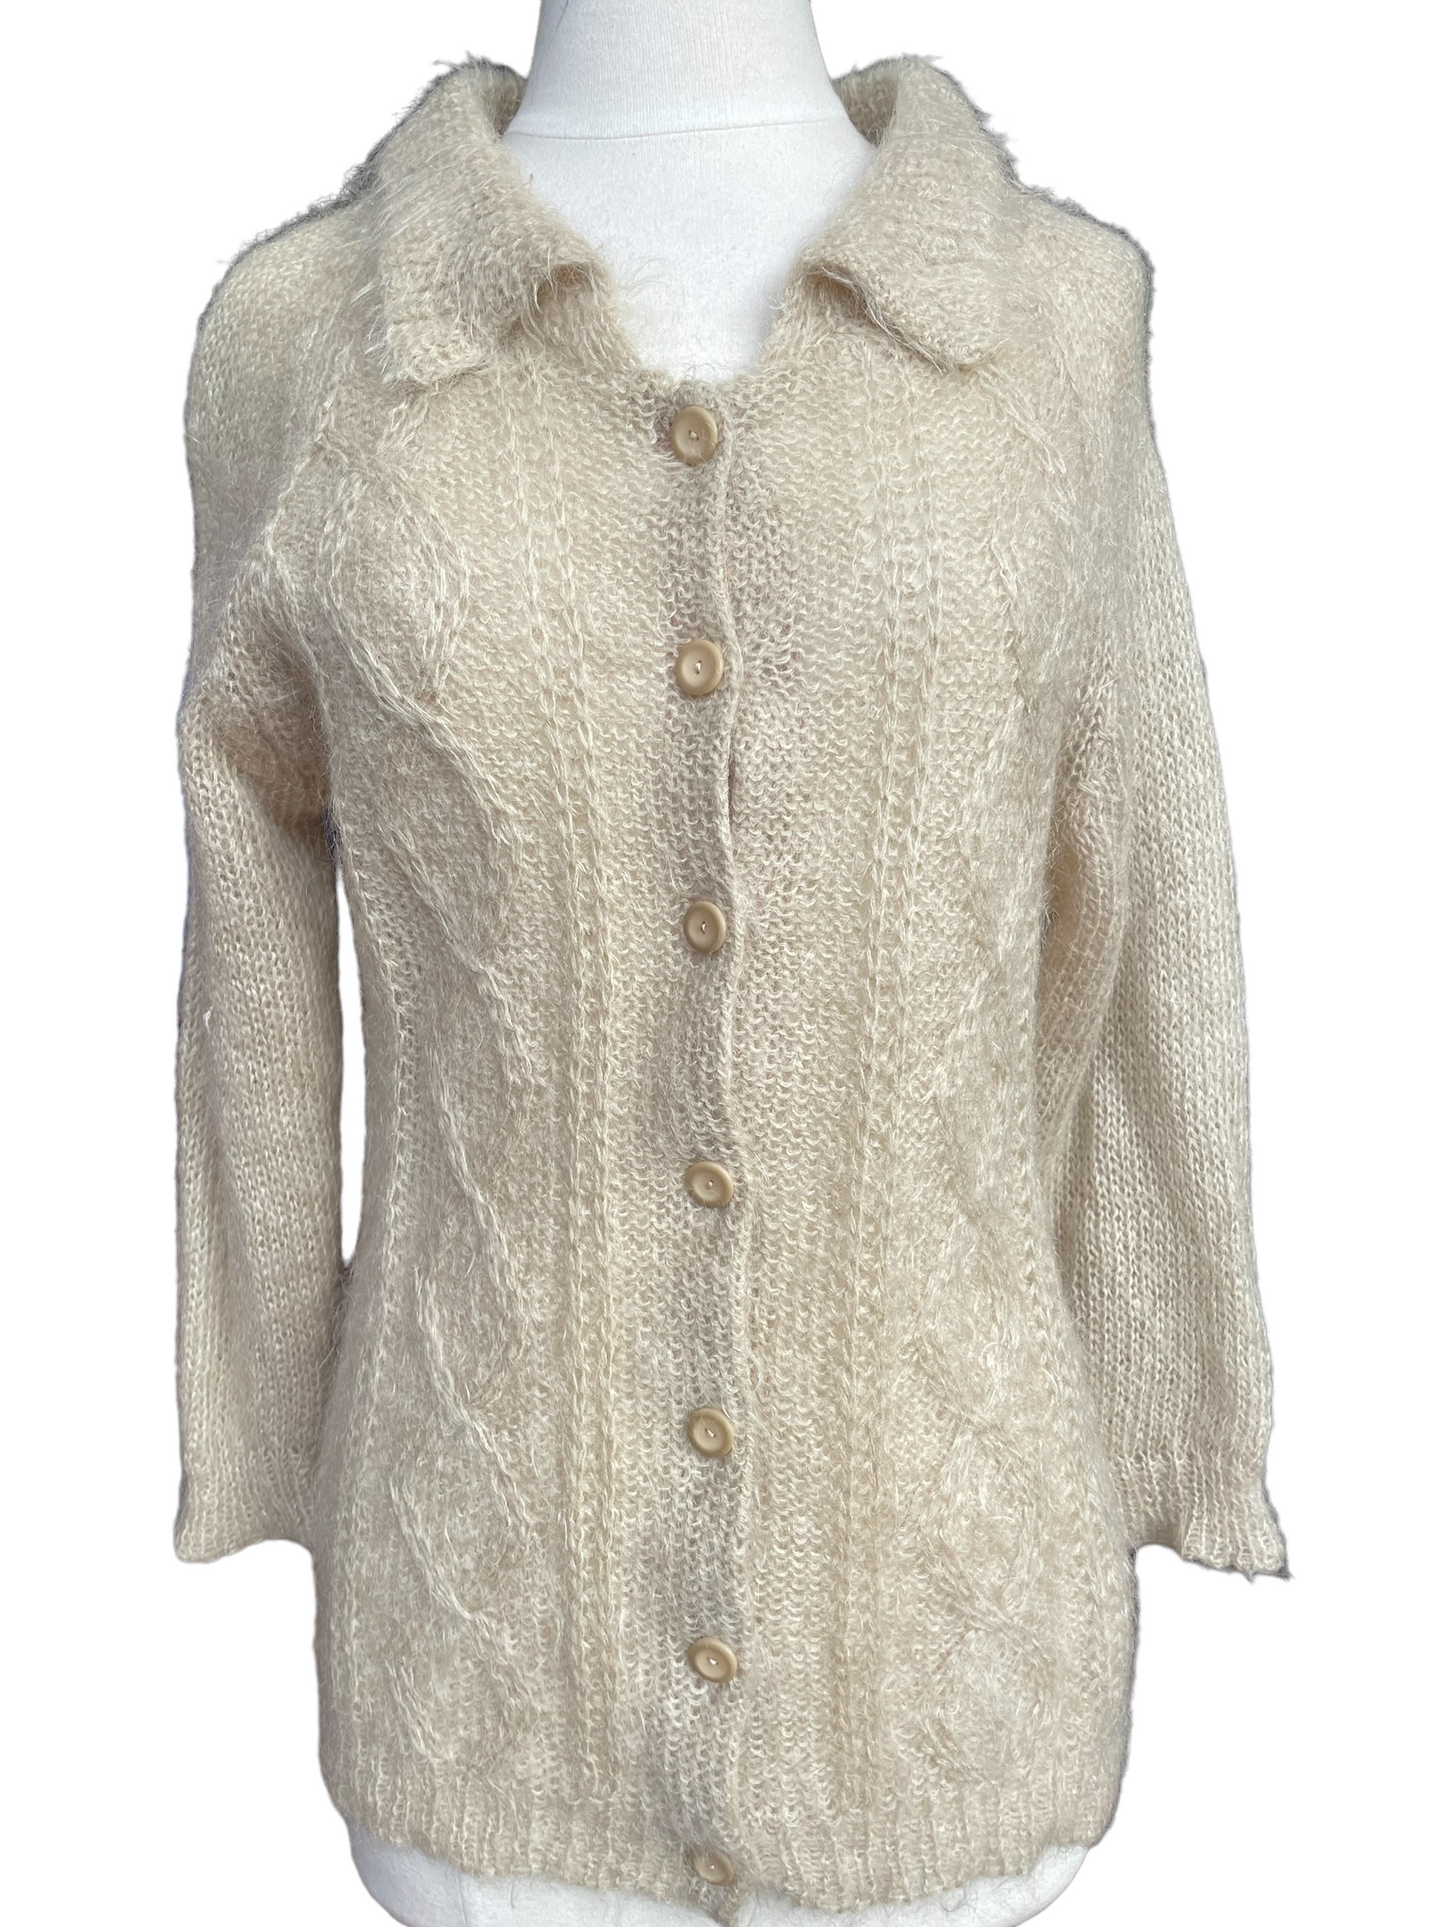 Front full viewVintage 1950's Hand Knit Wool Mohair Cardigan Sweater | Barn Owl VIntage | Seattle True Vintage